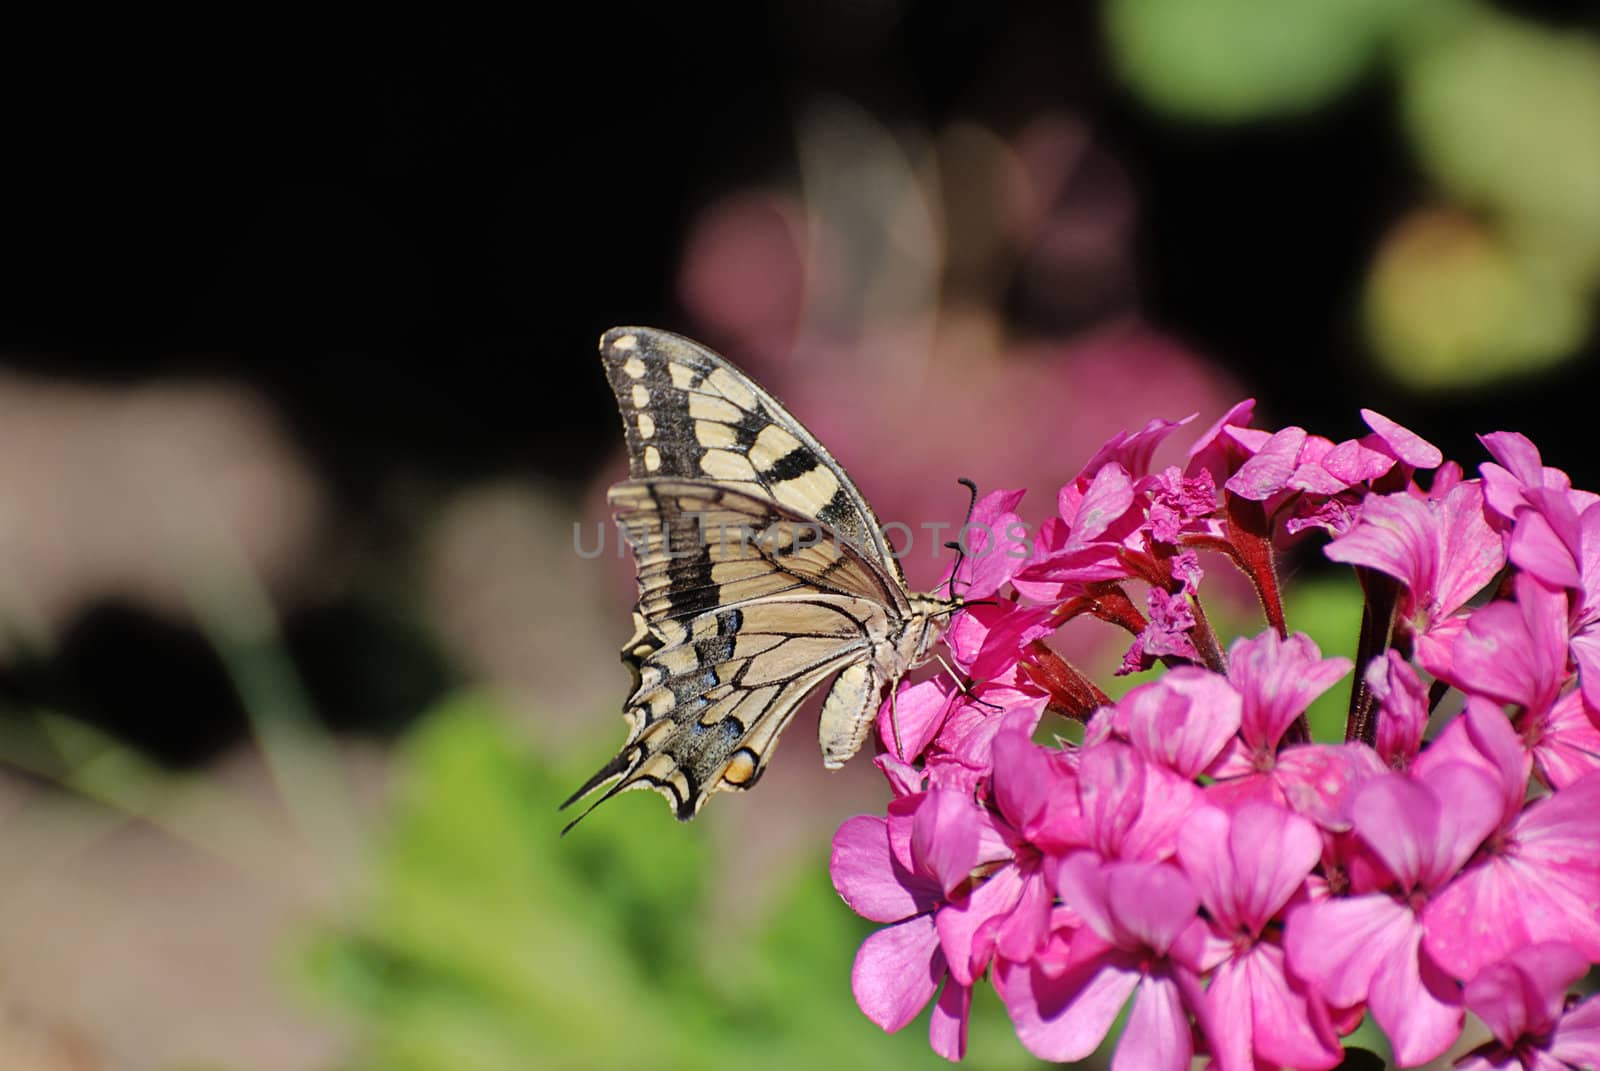 Swallowtail drinking from a flower